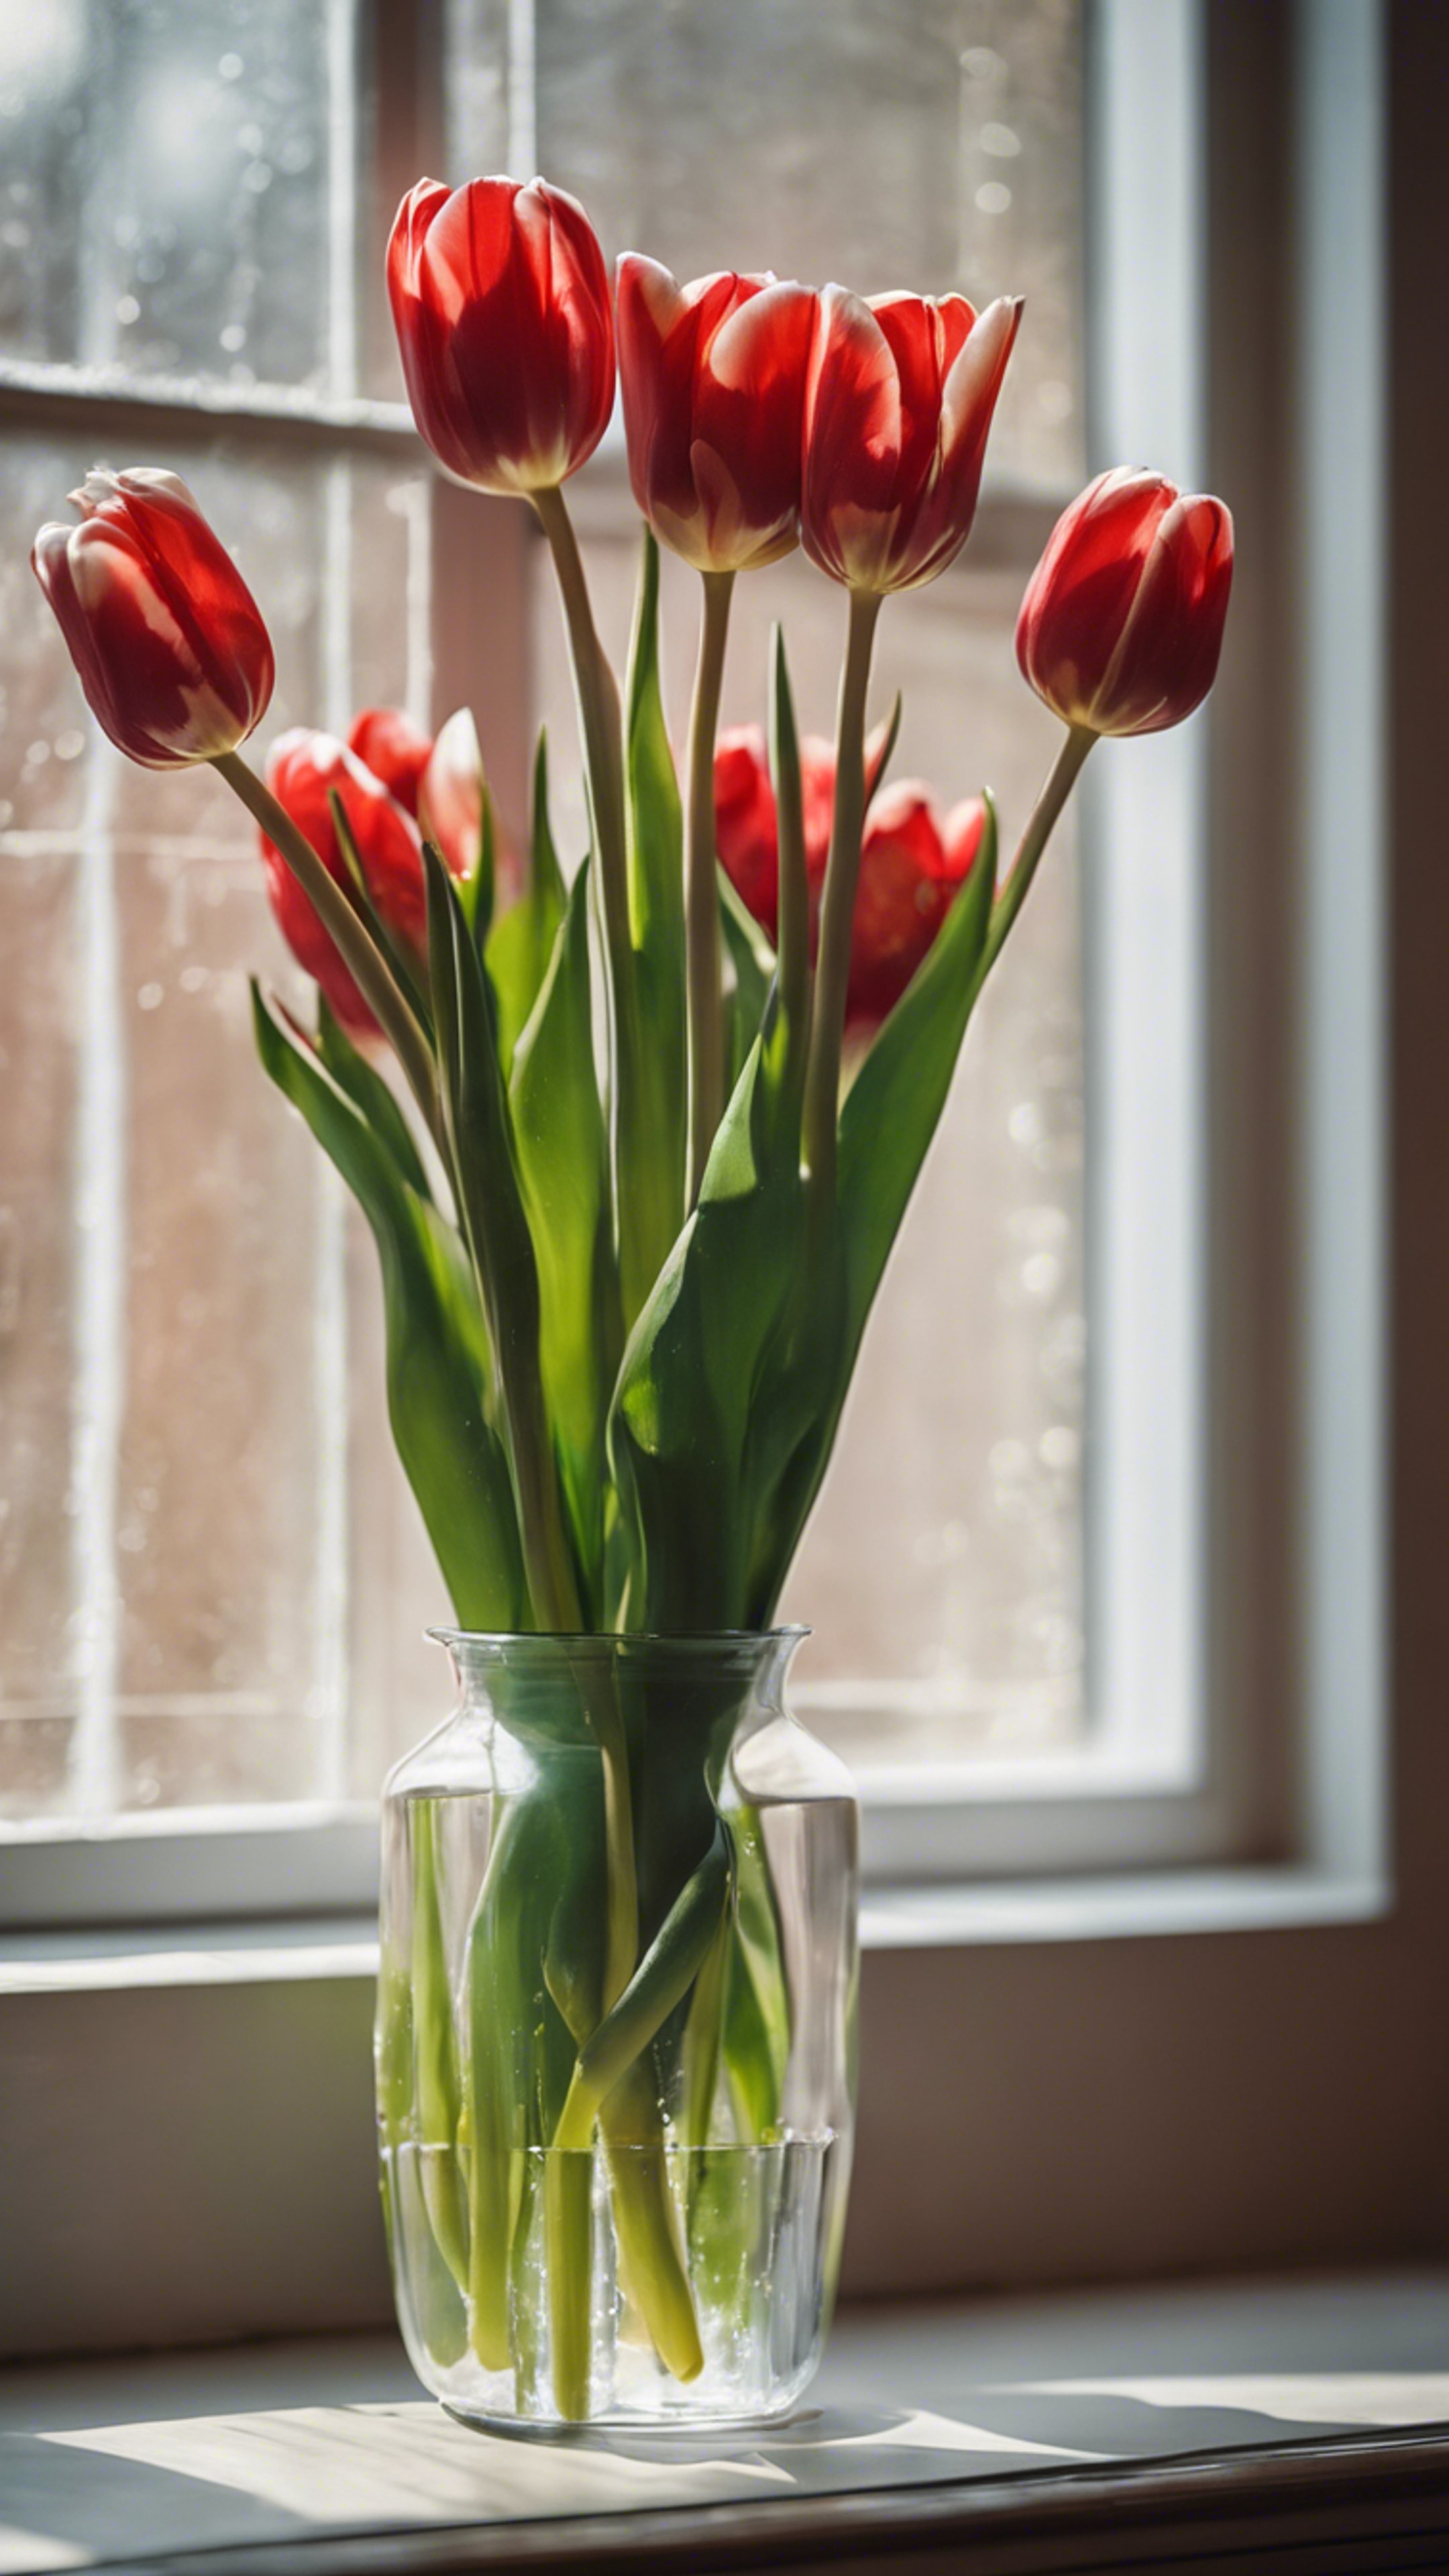 A bunch of vivid red and white tulips in a glass vase, lit by natural light. Tapeta[fc69acd6917c413b913f]